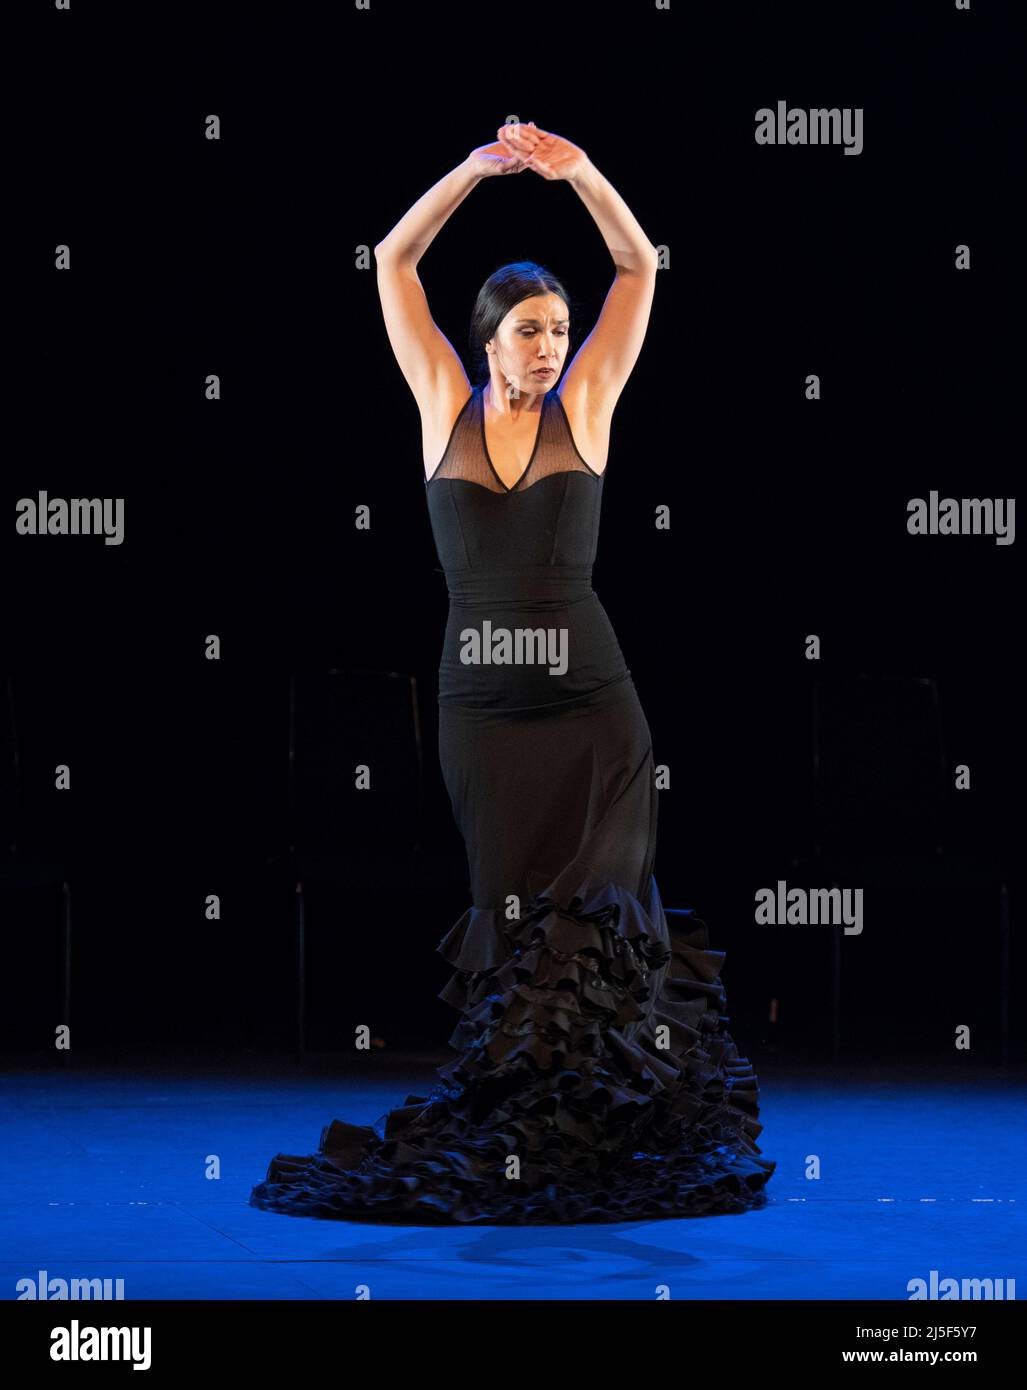 Sadlers Wells, London. 20 April 2022. Solera: Dress rehearsal for a World premiere Flamenco production (20-24 April) reunites Paco Peña and long term collaborator, director Jude Kelly. Image: Flamenco dancer Adriana Bilbao during rehearsal. (See Additional Information for usage). Credit: Malcolm Park/Alamy Stock Photo